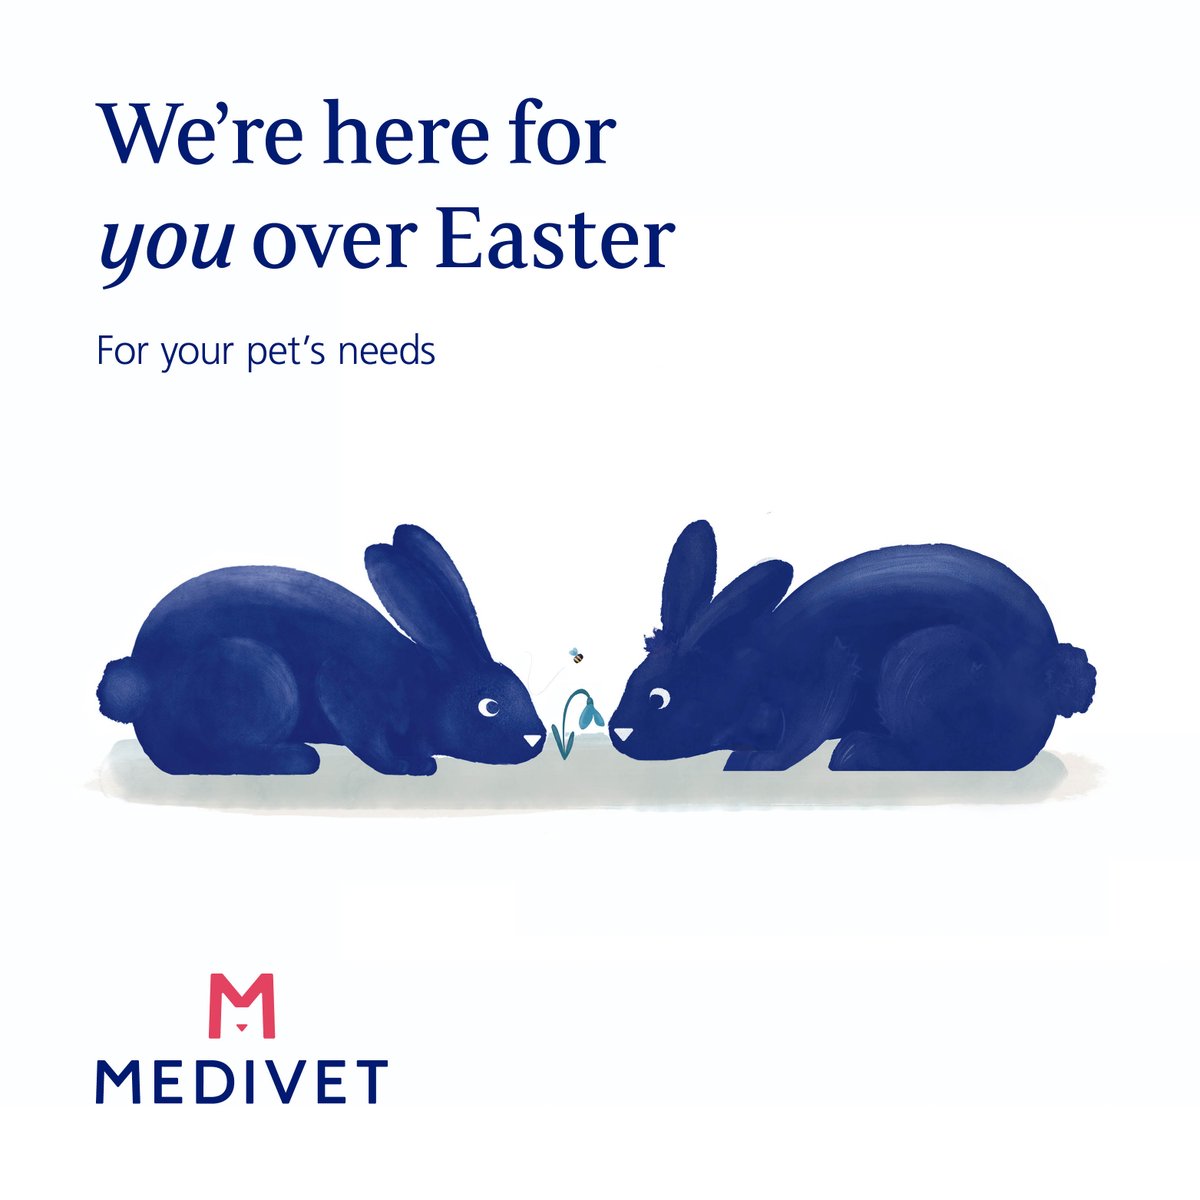 Over the #Easter weekend our opening hours may change, please contact your local practice for exact times using the link below. 🐰 medivetgroup.com/vet-practices/ Our 24 hour practices remain open for you and your pets.